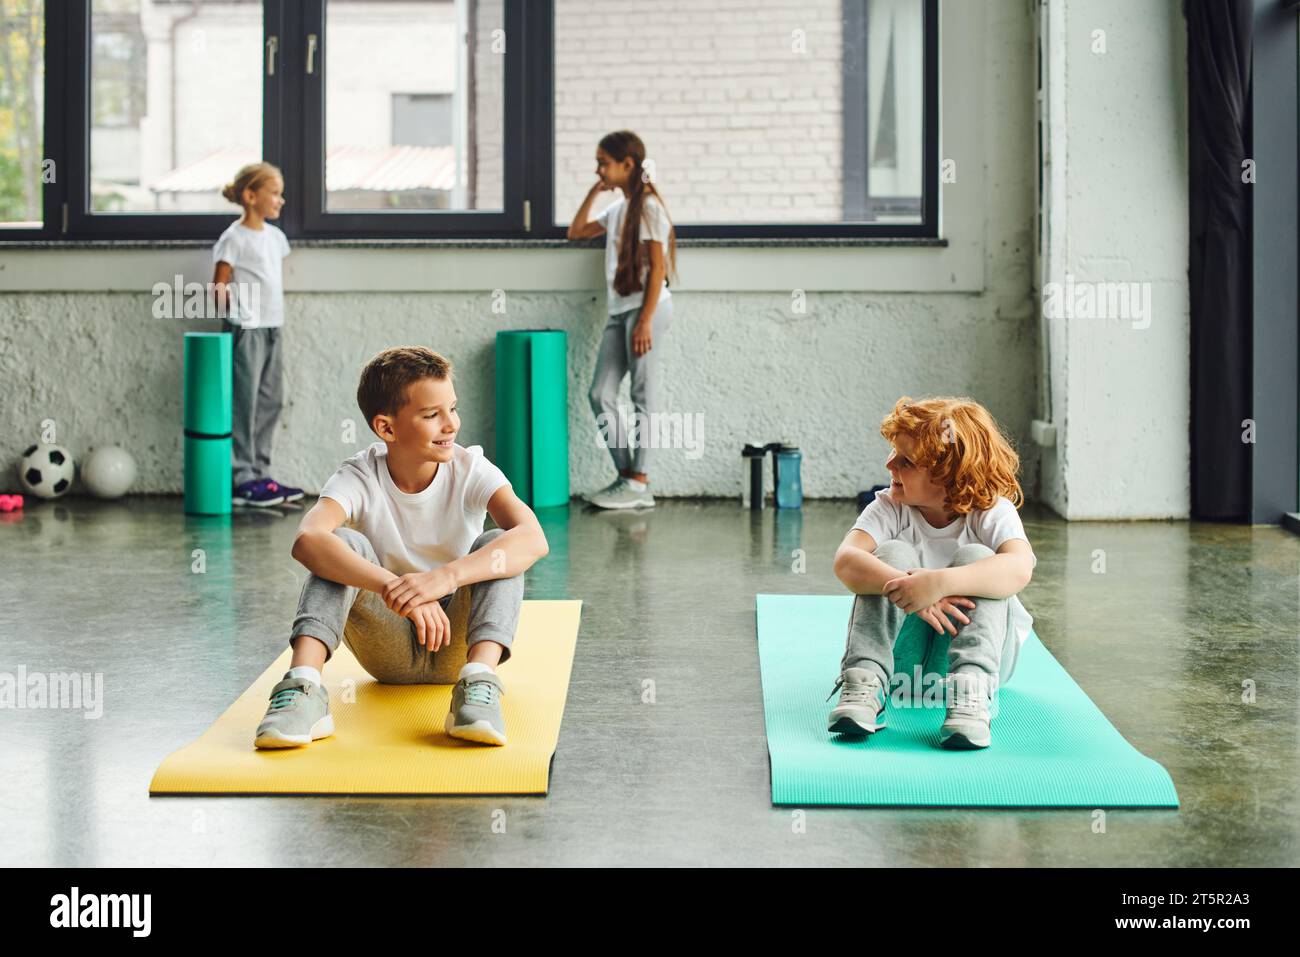 two cheerful boys smiling at each other on fitness mats with cute girls standing on backdrop Stock Photo